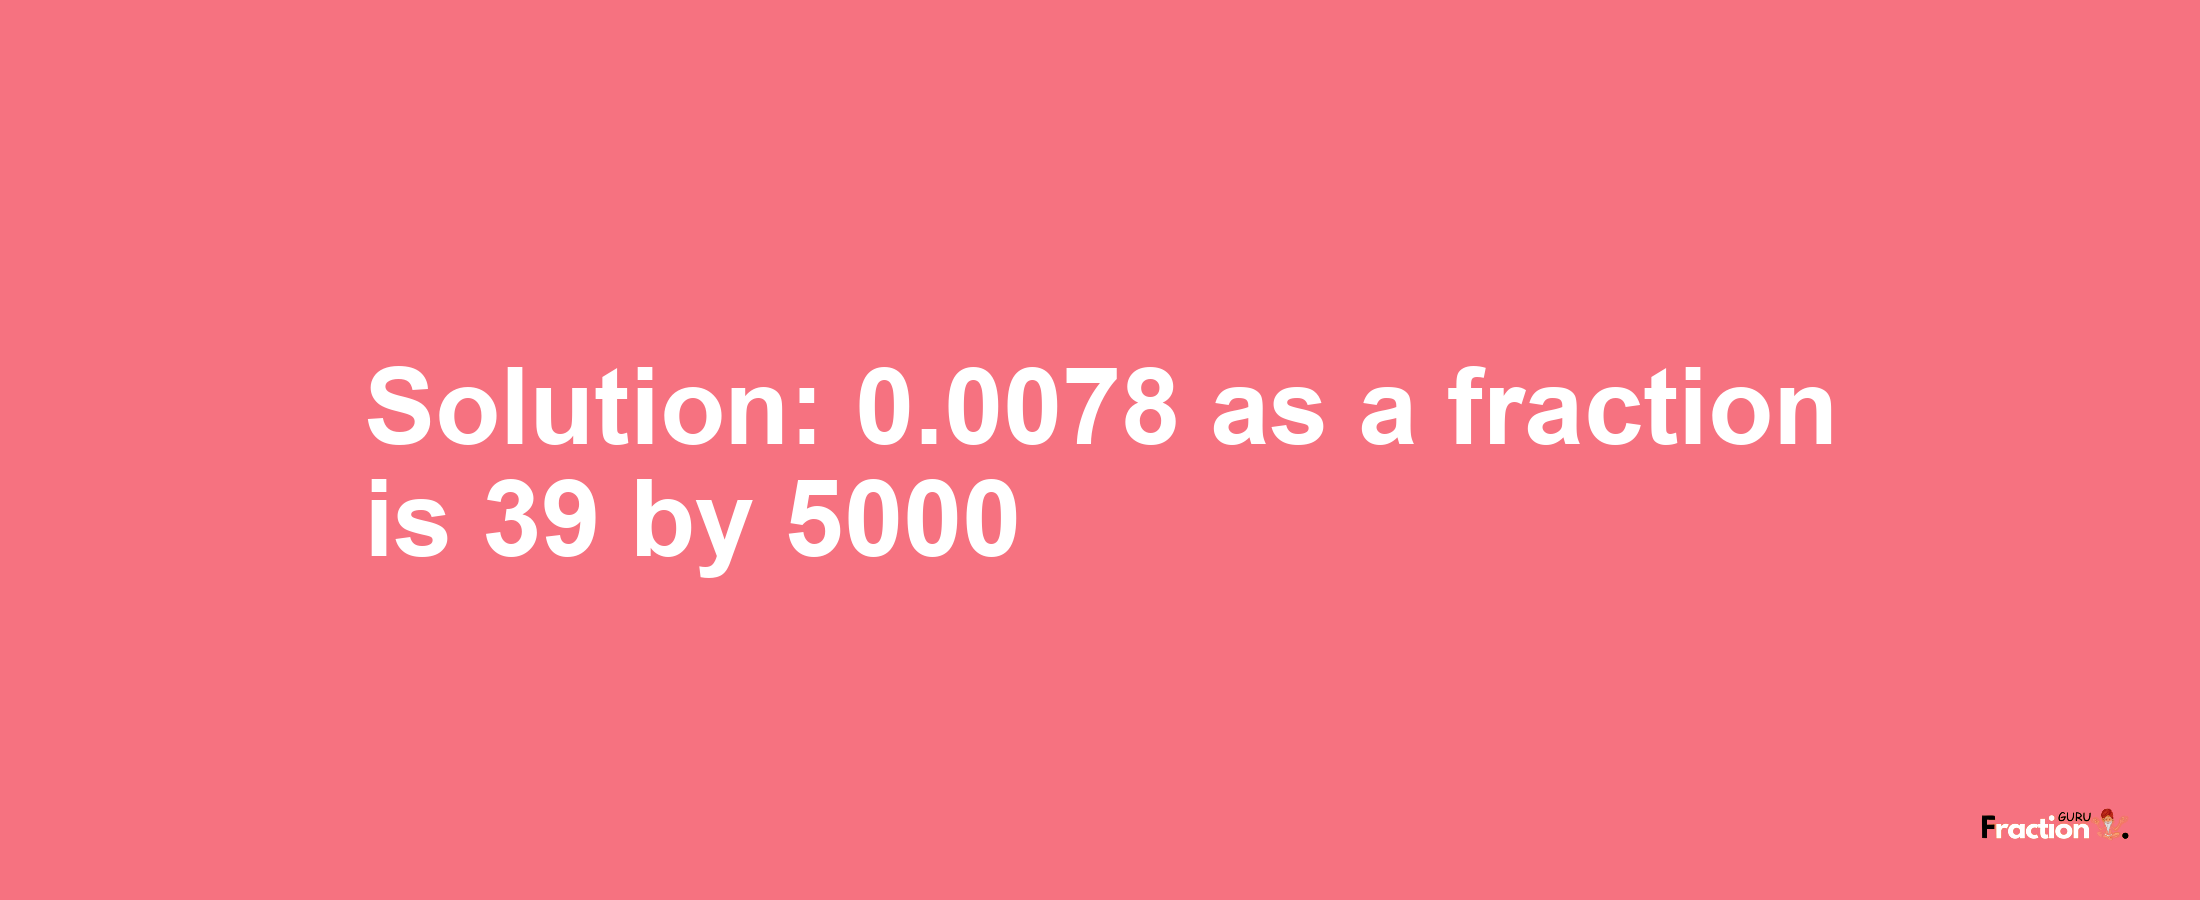 Solution:0.0078 as a fraction is 39/5000